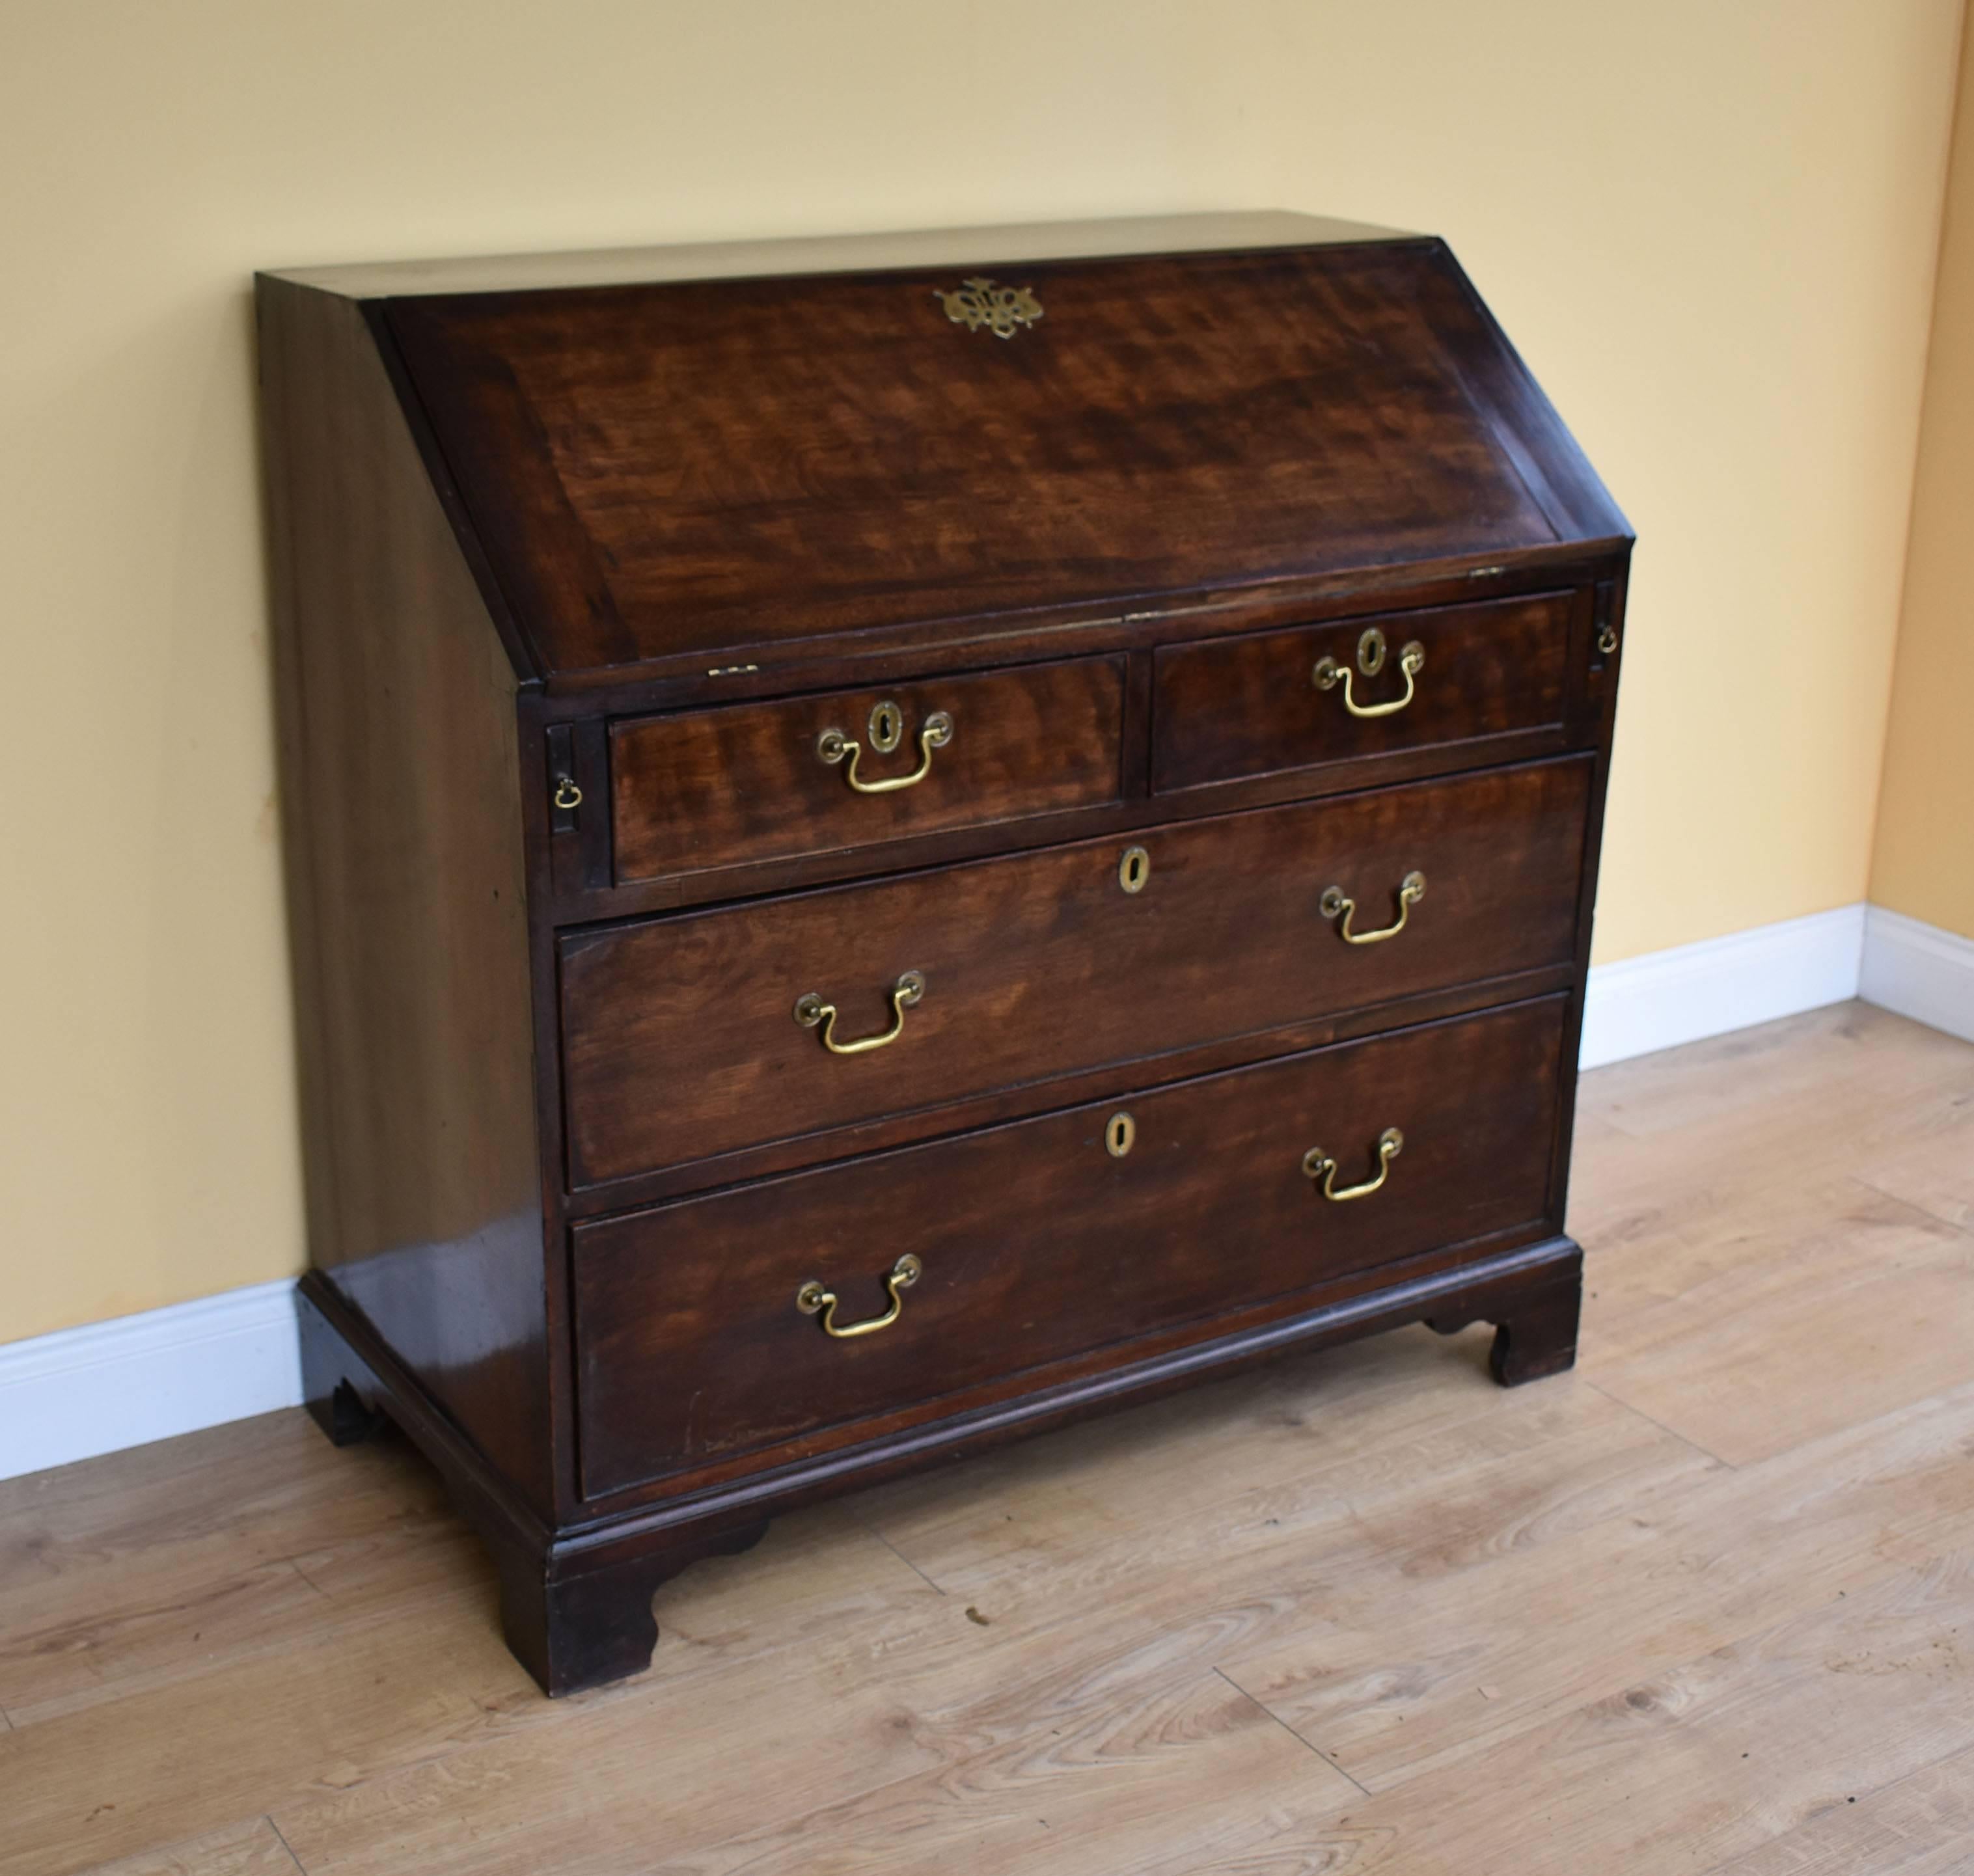 For sale is a good quality, George III oak and elm bureau. The fall front opens to reveal a fitted interior with a green leather writing surface, with decorative gold tooling. This is above two short drawers, with a further two long drawers below,